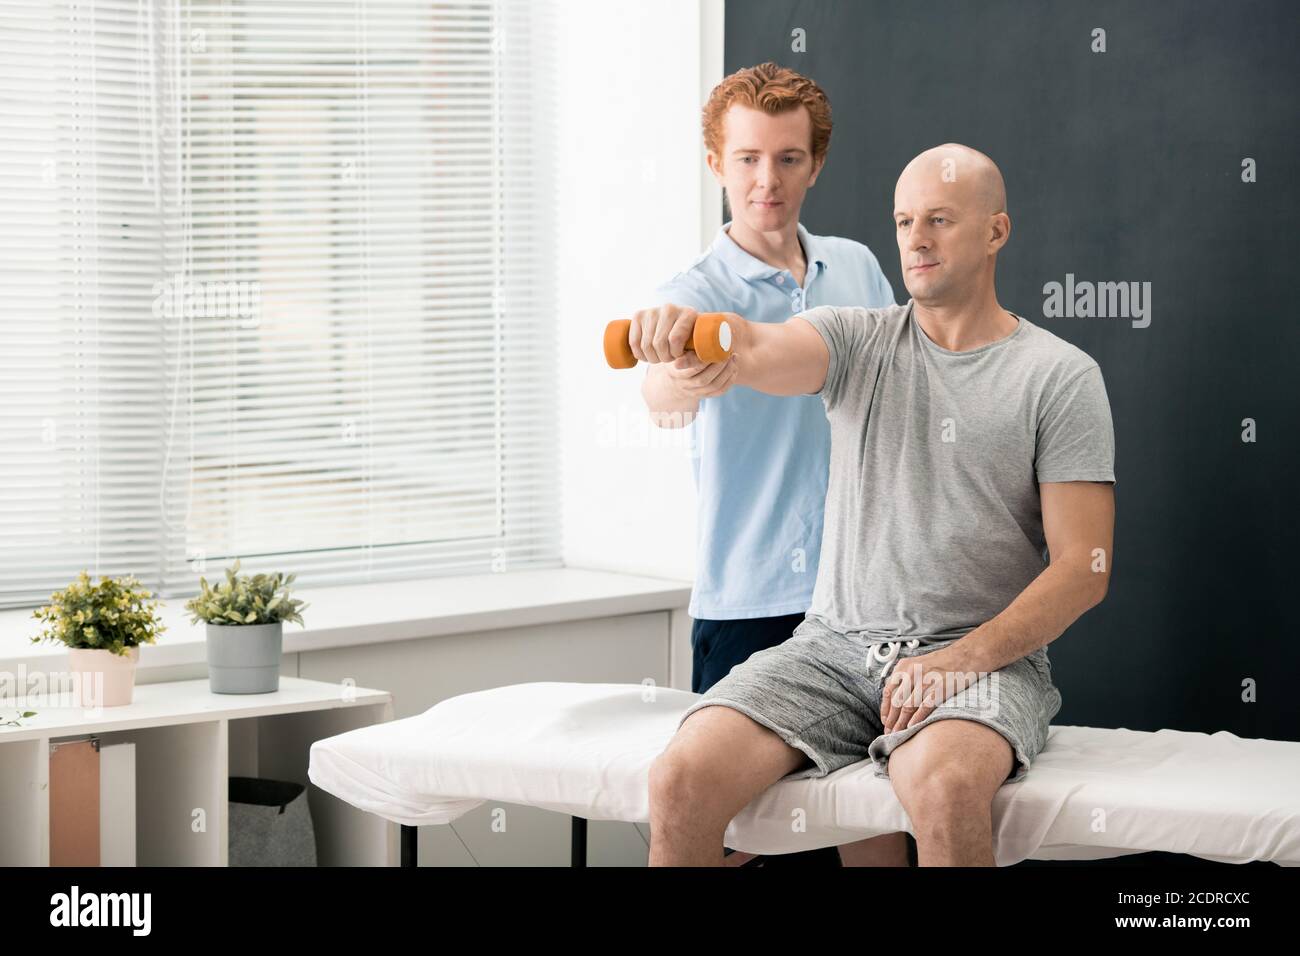 Young contemporary physiotherapist helping mature male patient lifting dumbbell Stock Photo